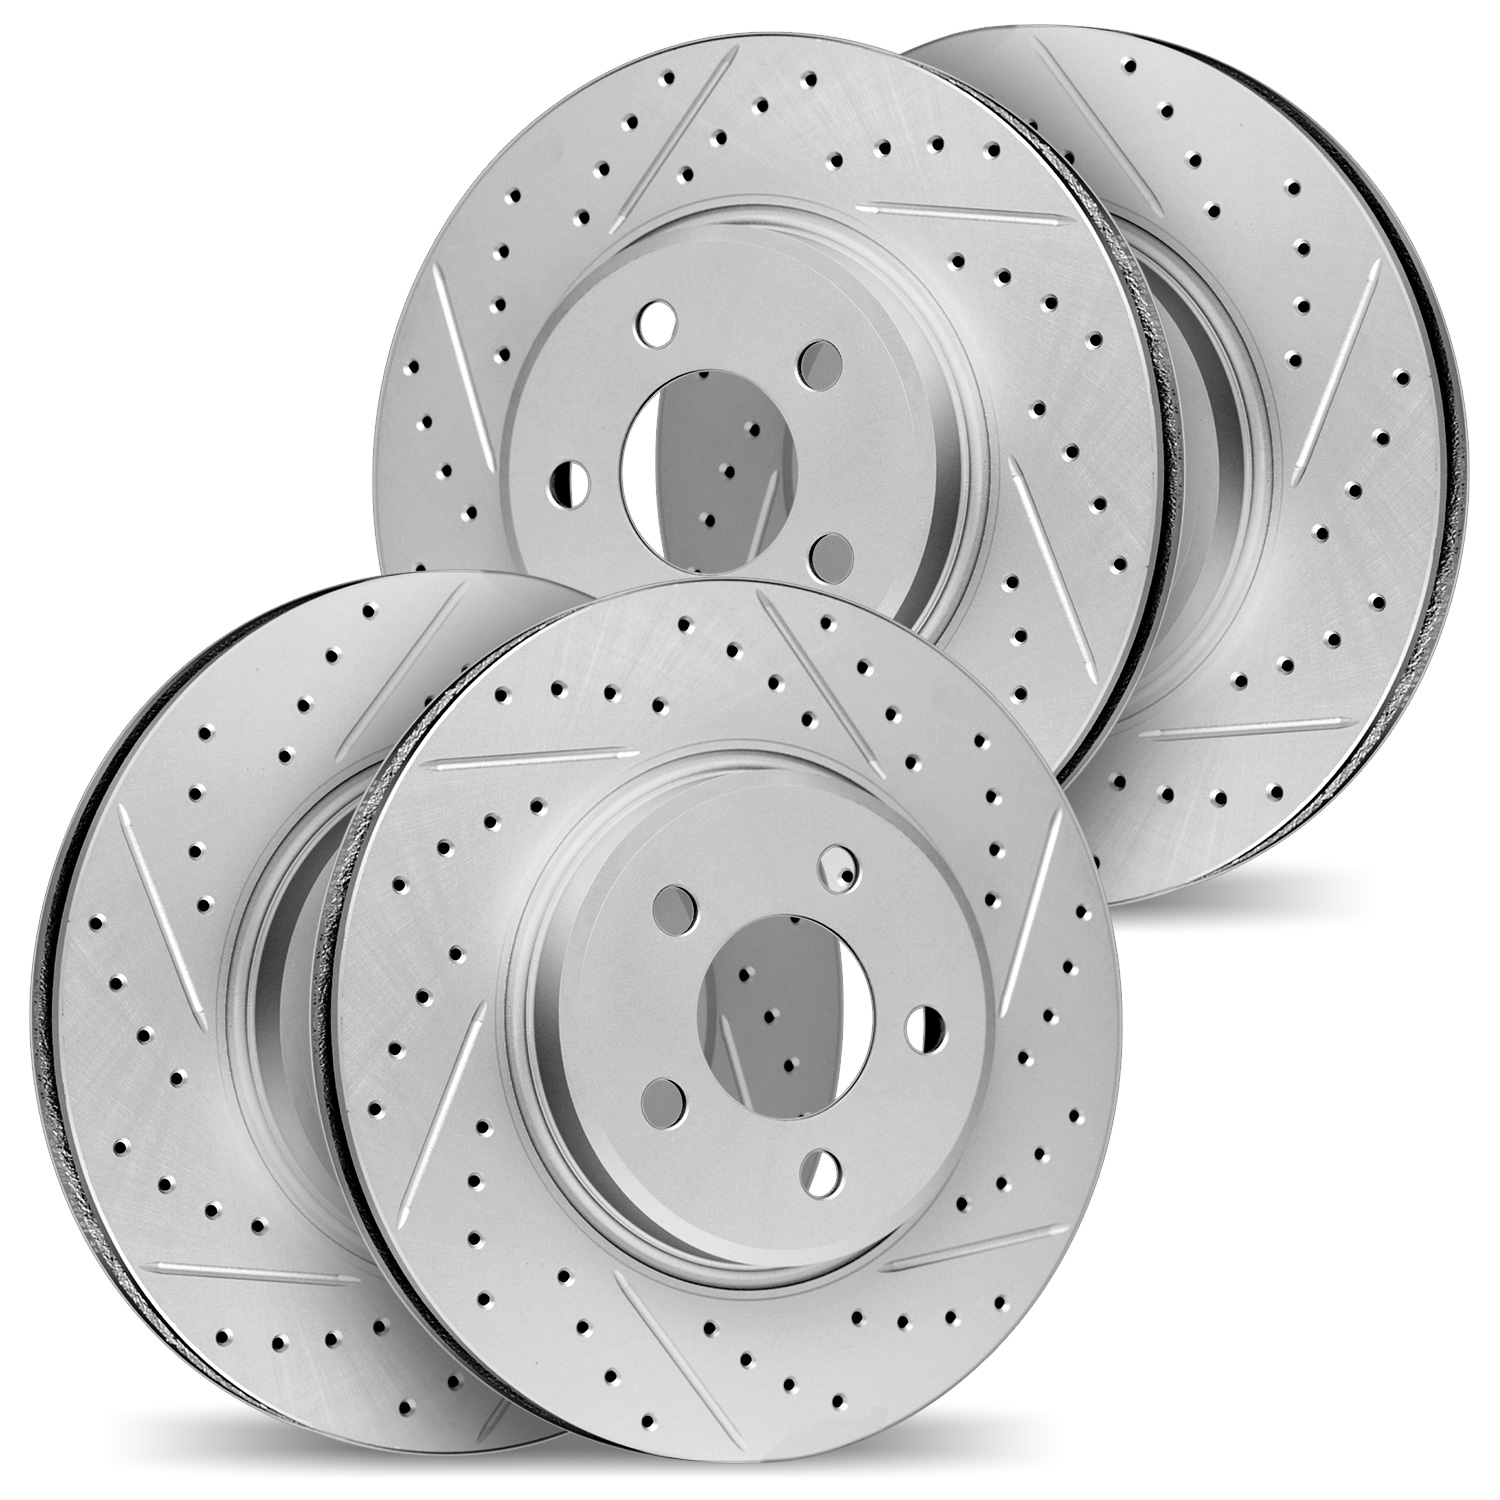 2004-68001 Geoperformance Drilled/Slotted Brake Rotors, 2003-2008 Infiniti/Nissan, Position: Front and Rear